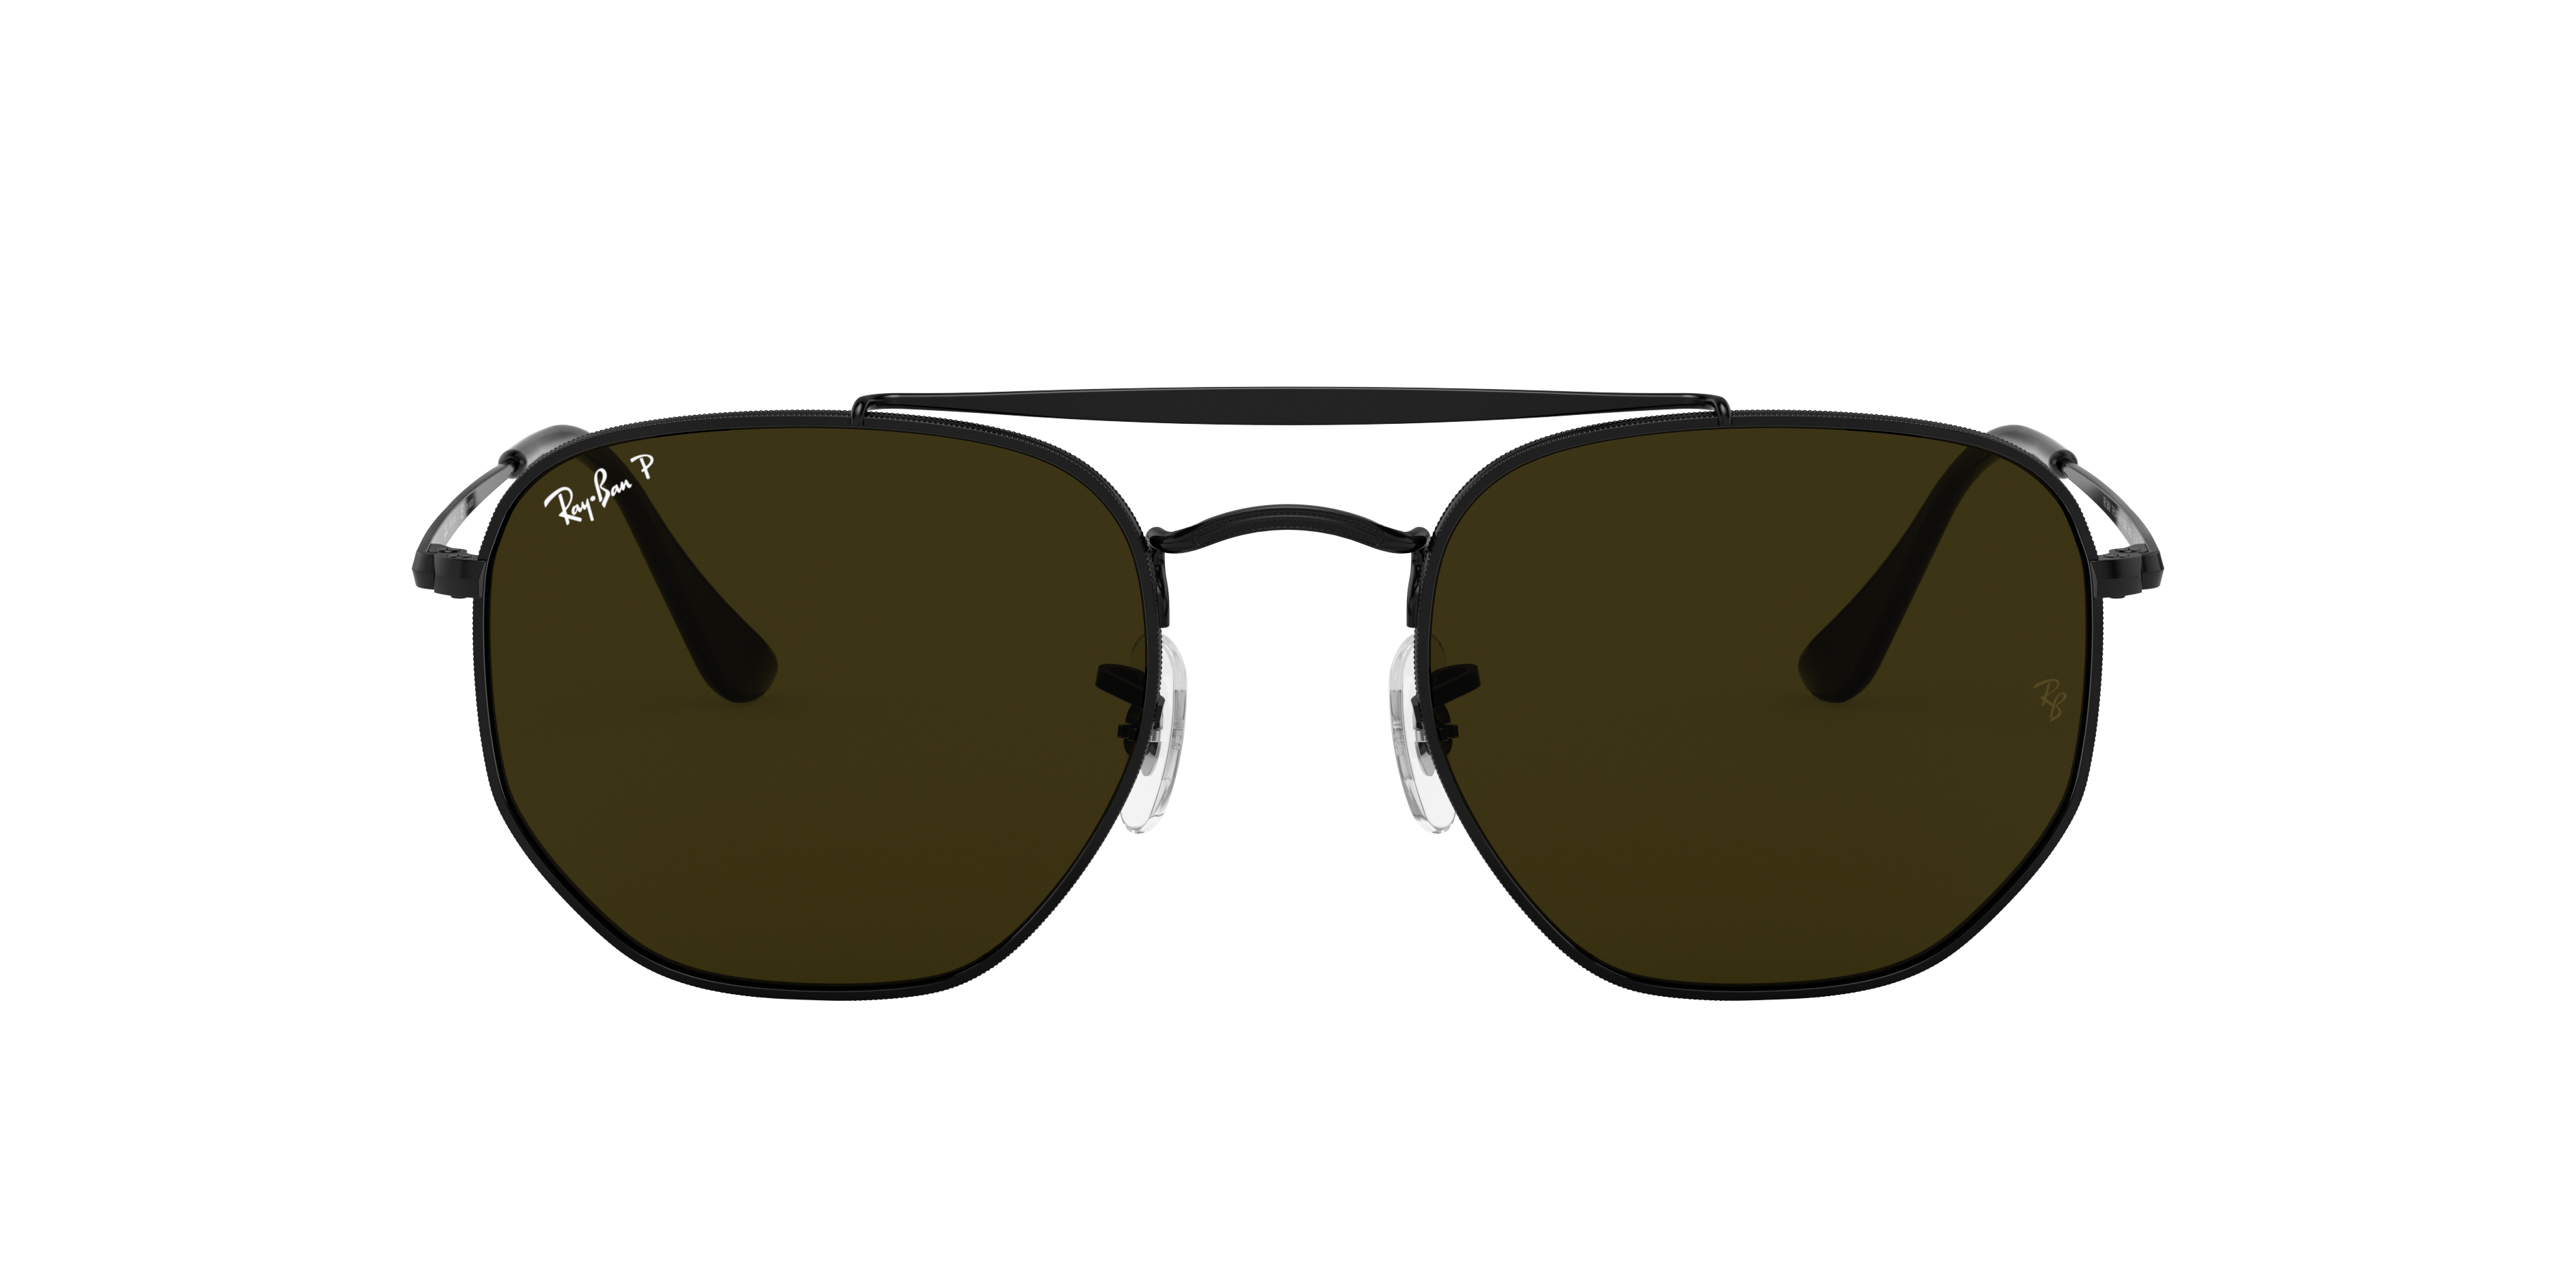 ray ban glasses models with price